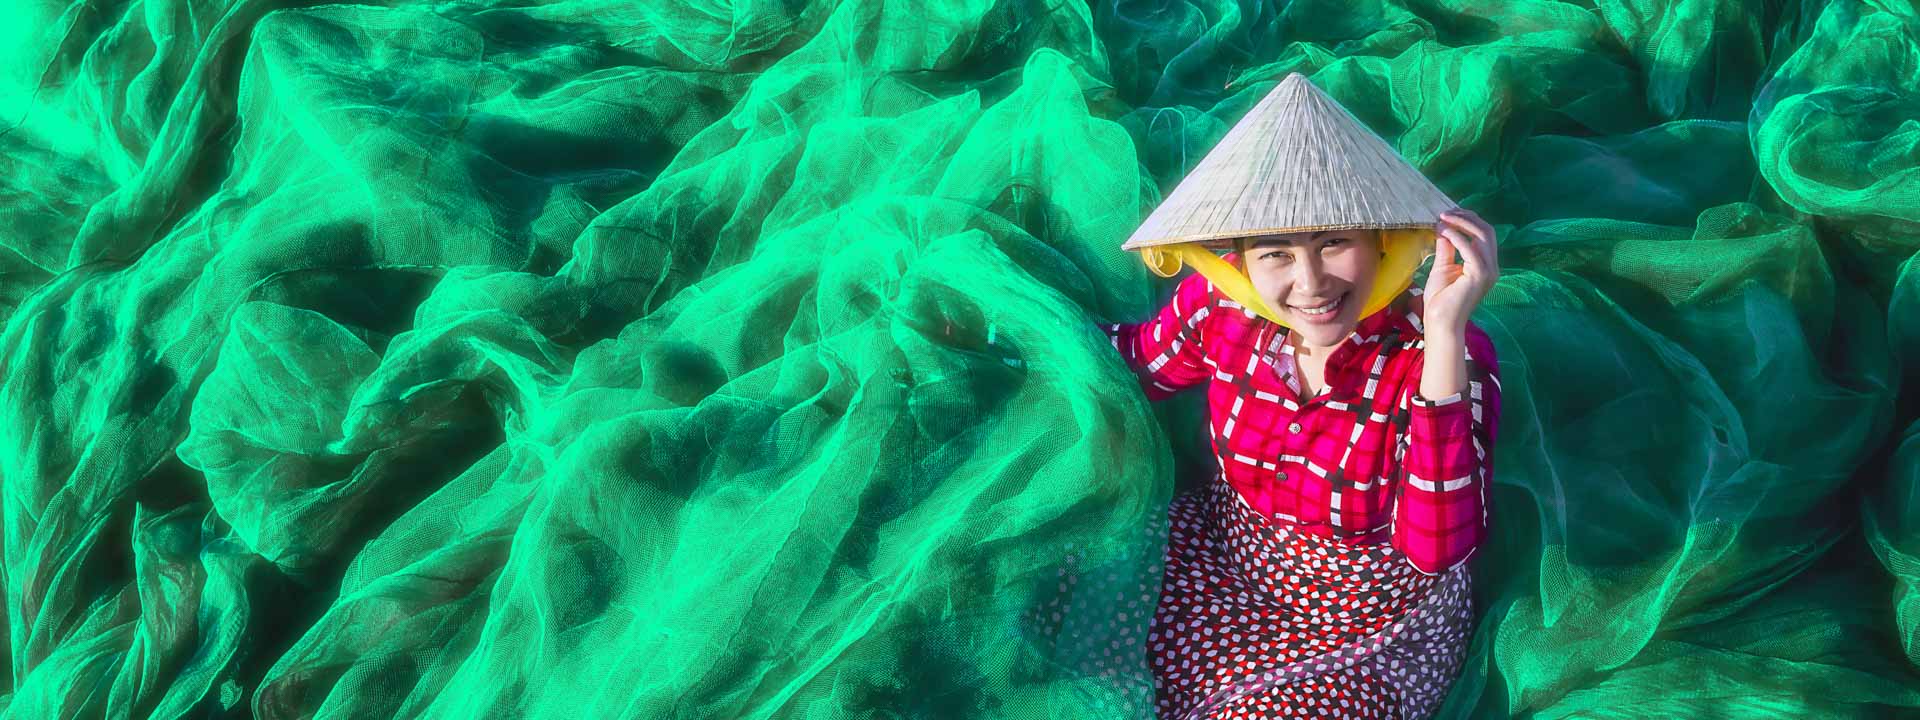 A Journey of Discovery in 5 Days in the Centre of Vietnam, Taste Local Spicy Food, Relax in Danang Beach and Visit its Highlights, Discover Two World’s Heritage Listed Sites Hue and Hoi An.